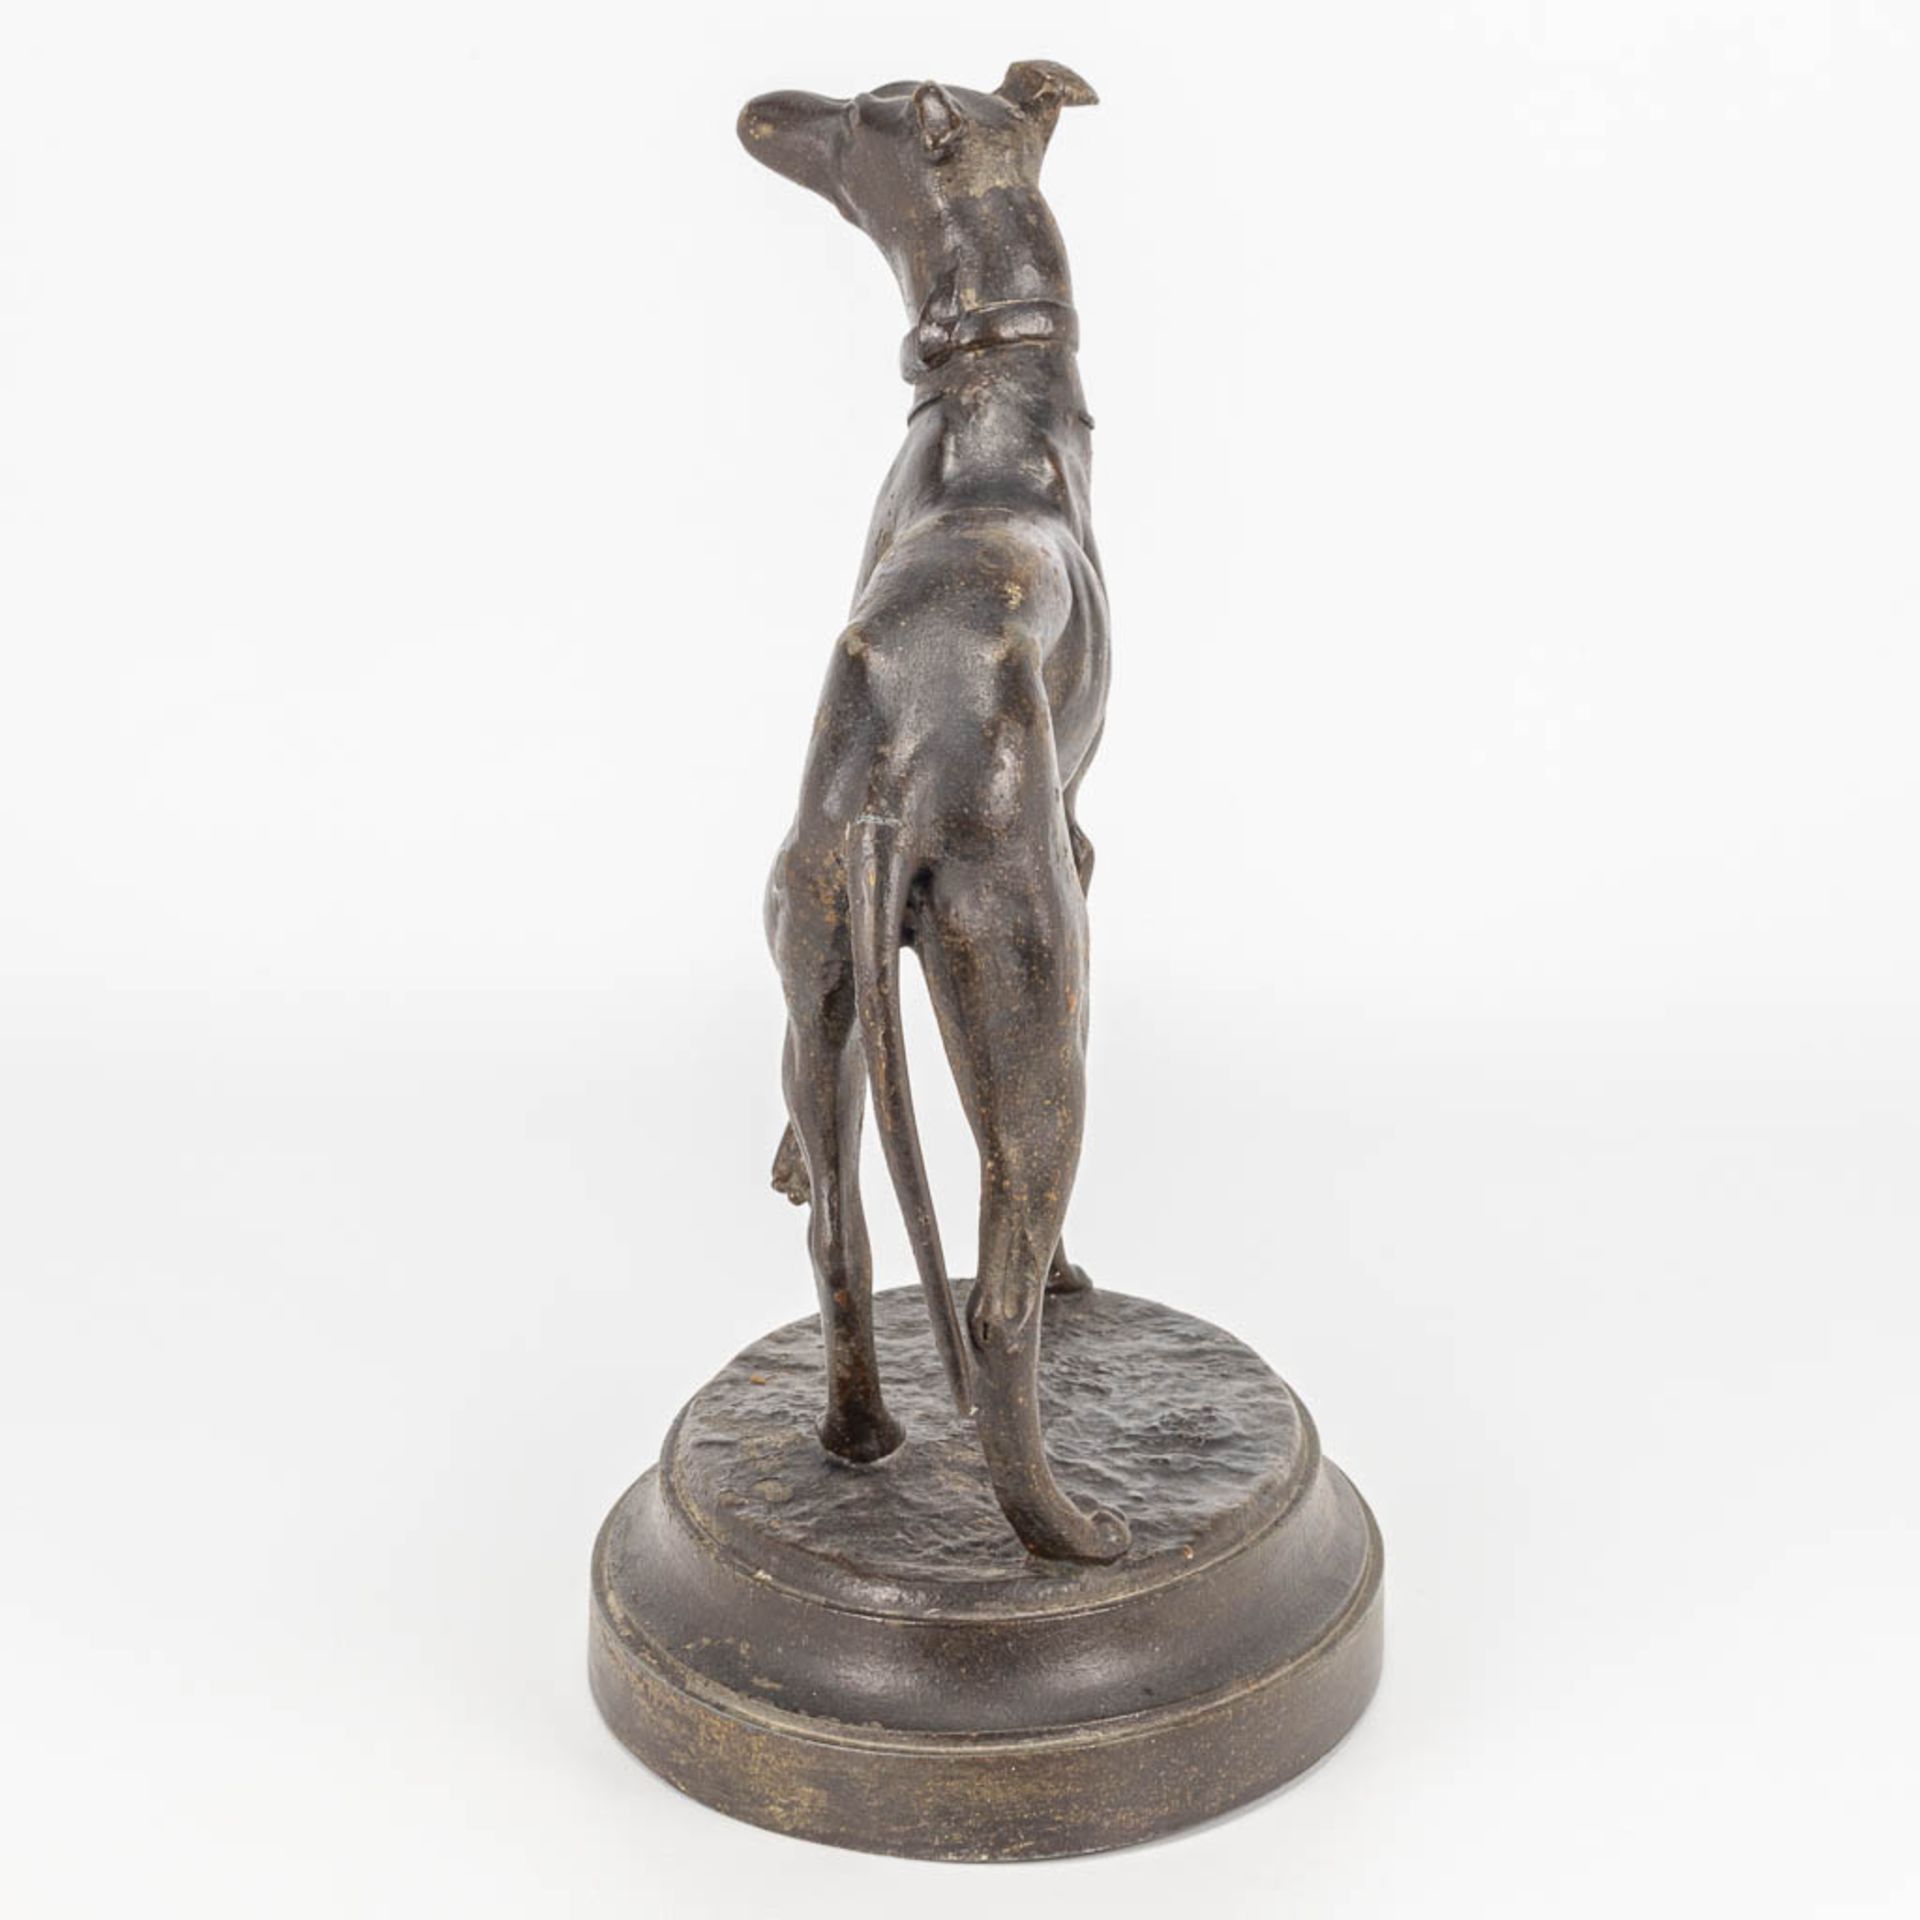 A statue of a greyhound made of spelter, Illegibly signed. - Image 3 of 12